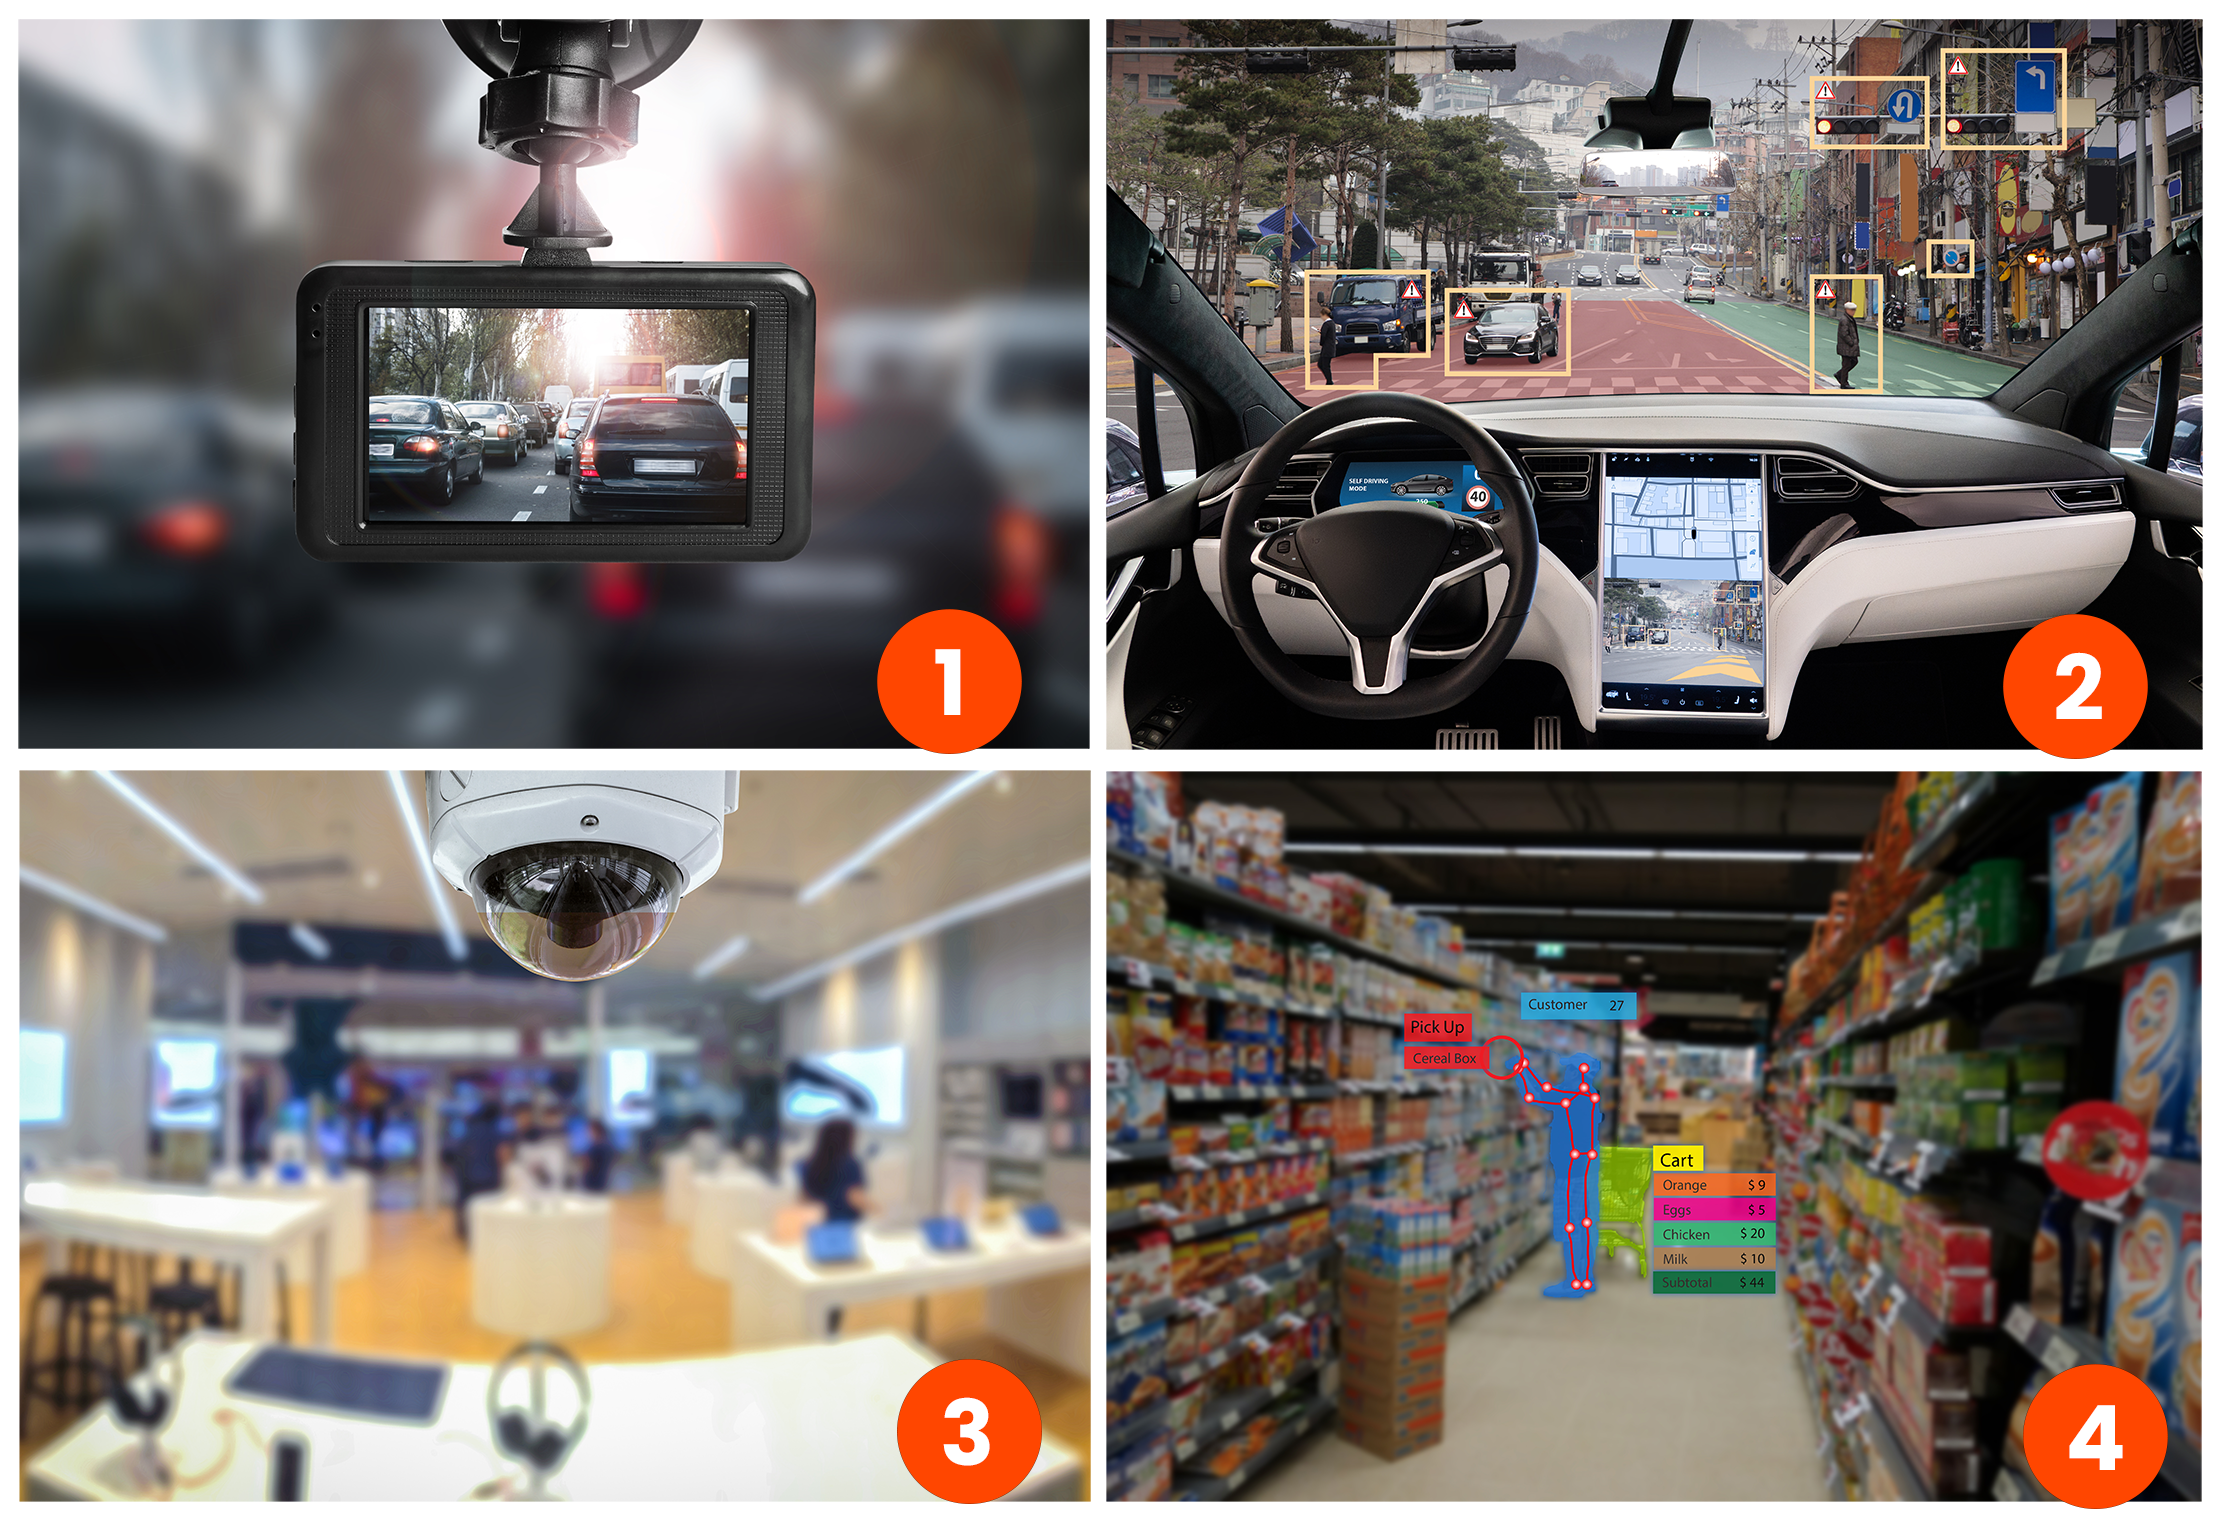 A composite image showing a dashcam looking through the windscreen of a car in heavy traffic, an illustration of the view shown by a self-driving cars' sensors, a technology store with a ceiling camera, and a virtualised view of a grocery store with AI detecting people and products.